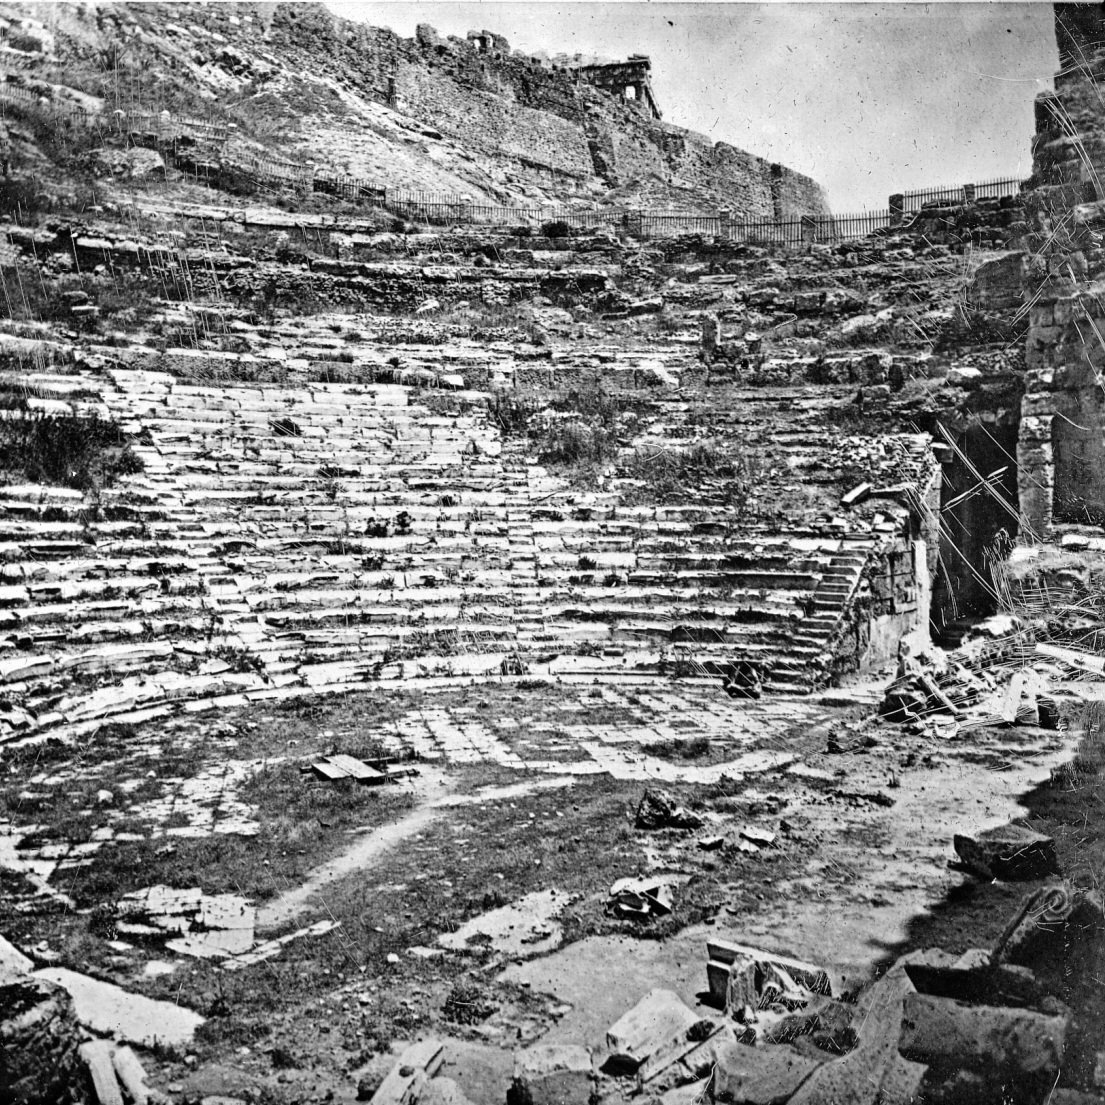 The Odeon of Herodes Atticus is a Roman Theatre on the slopes of the Acropolis in Athens. It was completed c. AD 161, destroyed by 267, and renovated in 1950. Now the Theatre is used for the Athens Festival, May - Oct. 1st photo shows the theatre now, other photos from the 1880s.